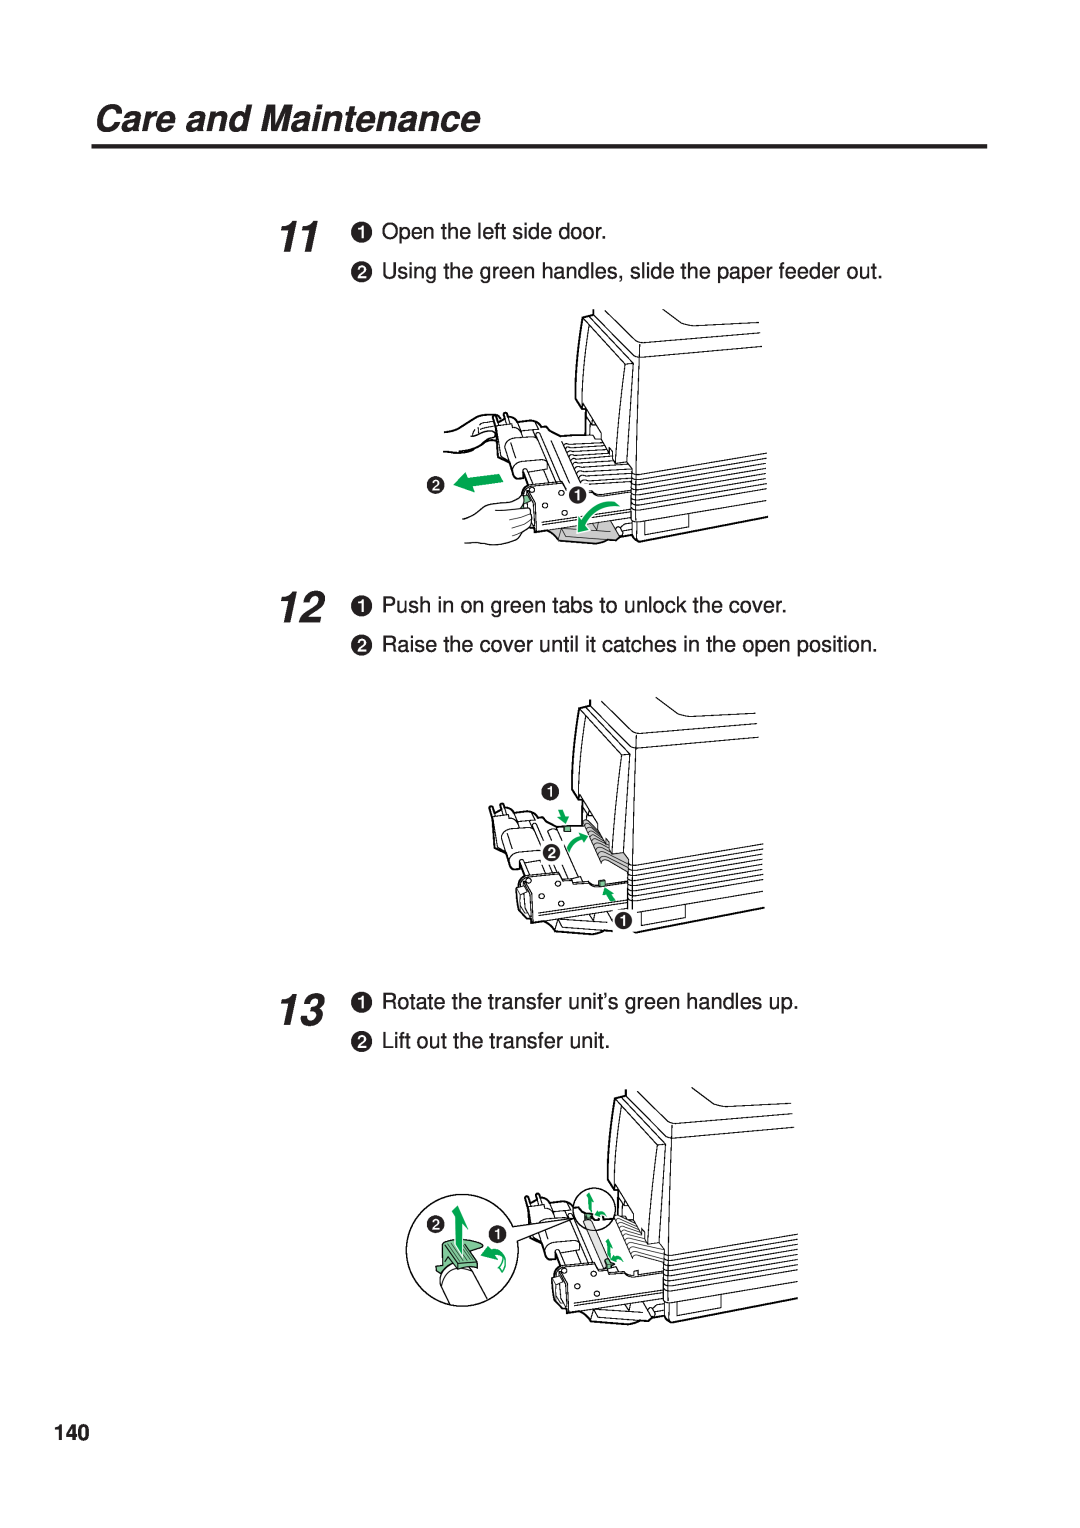 Panasonic KX-PS8000 manual 11 # Open the left side door, $ Using the green handles, slide the paper feeder out, # $ # 